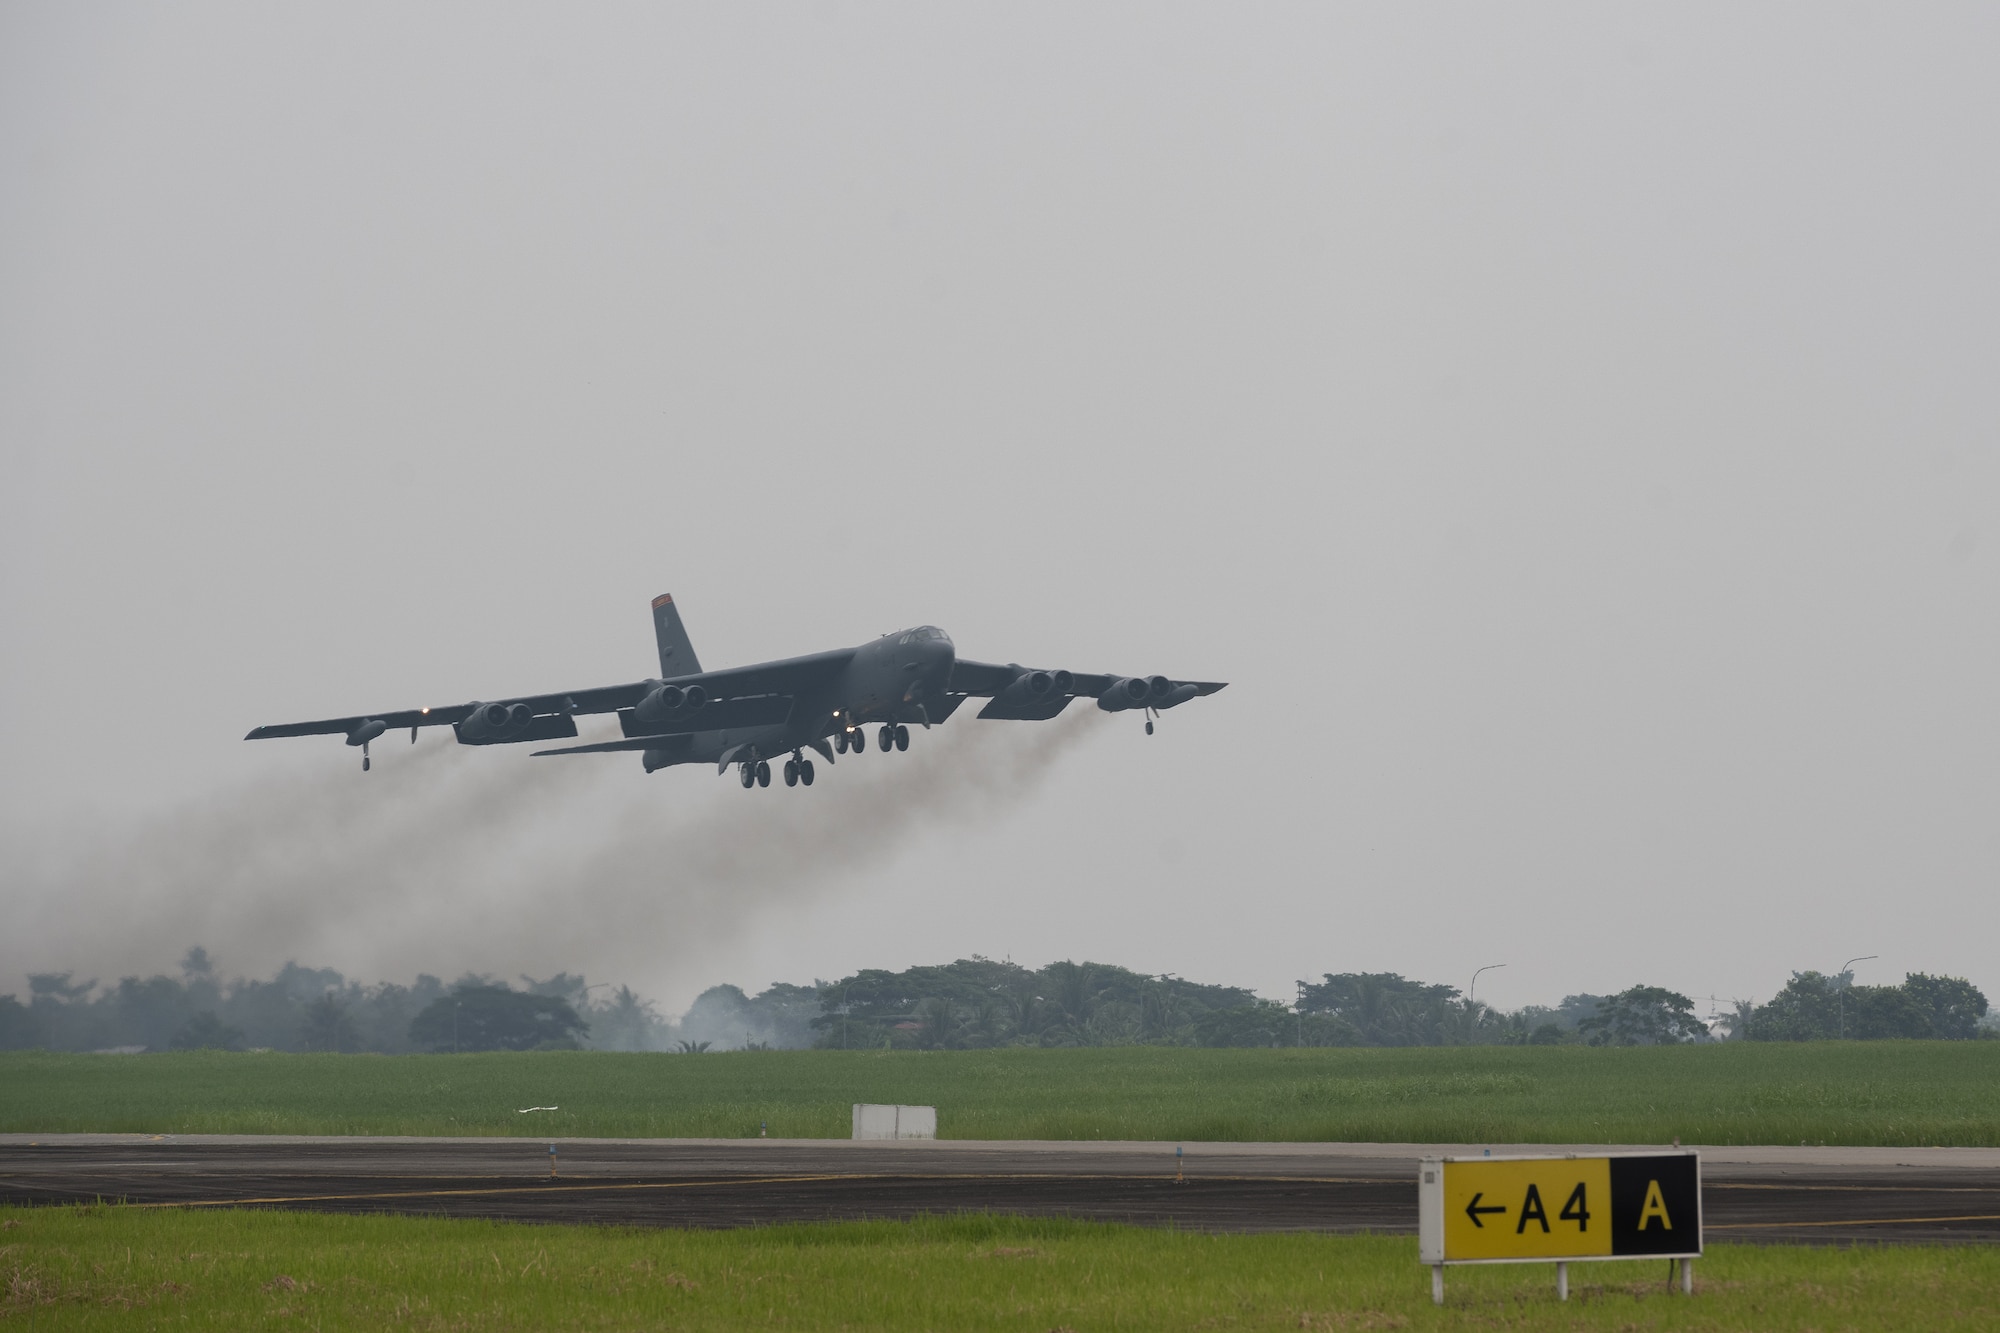 A U.S. Air Force B-52H Stratofortress assigned to the 23rd Bomb Squadron at Minot Air Force Base, North Dakota, takes off in support of a bilateral military training exercise at the Kualanamu International Airport in Medan, Indonesia, June 21, 2023. Bomber deployments and operations like this enable crews to maintain a high state of readiness and proficiency, and validate the U.S. Air Force’s always-ready, global strike capability. This particular training flight marked the first time a U.S. Air Force B-52 had taken off from Indonesian soil. (U.S. Air Force photo by Tech. Sgt. Zade Vadnais)